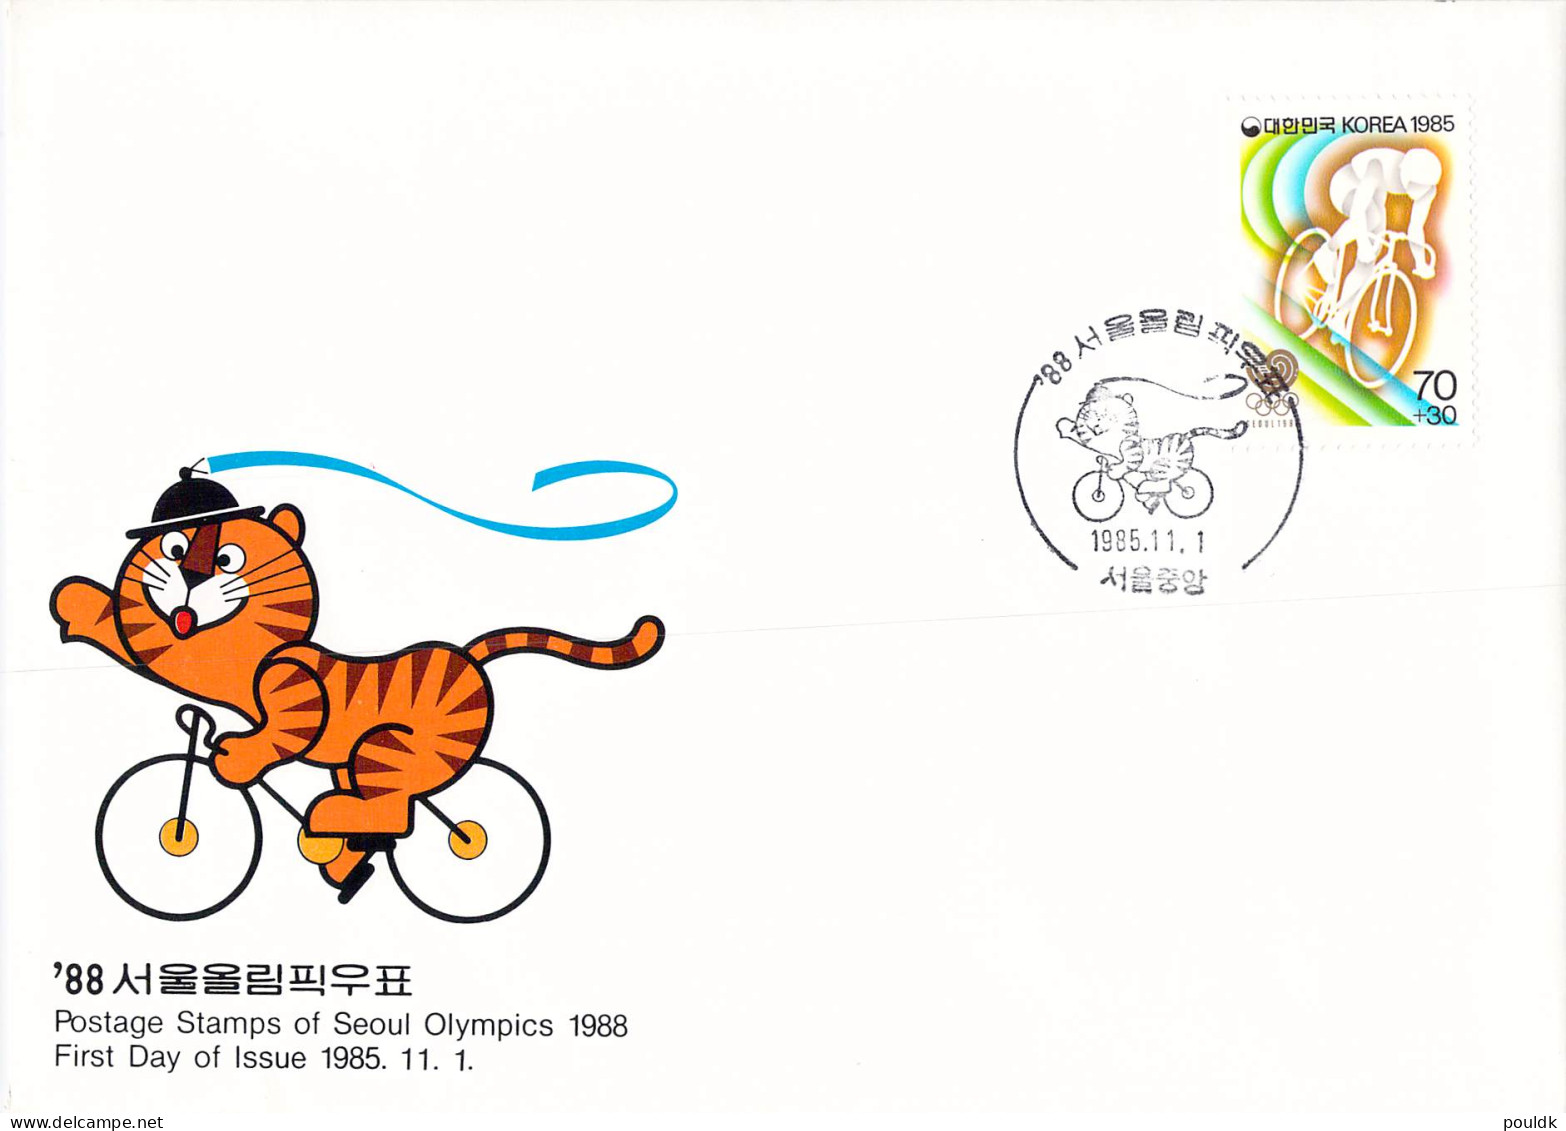 Olympic Games in Seoul 1988 - Ten Covers. Postal weight approx 0,080 kg. Please read Sales Conditions under Image